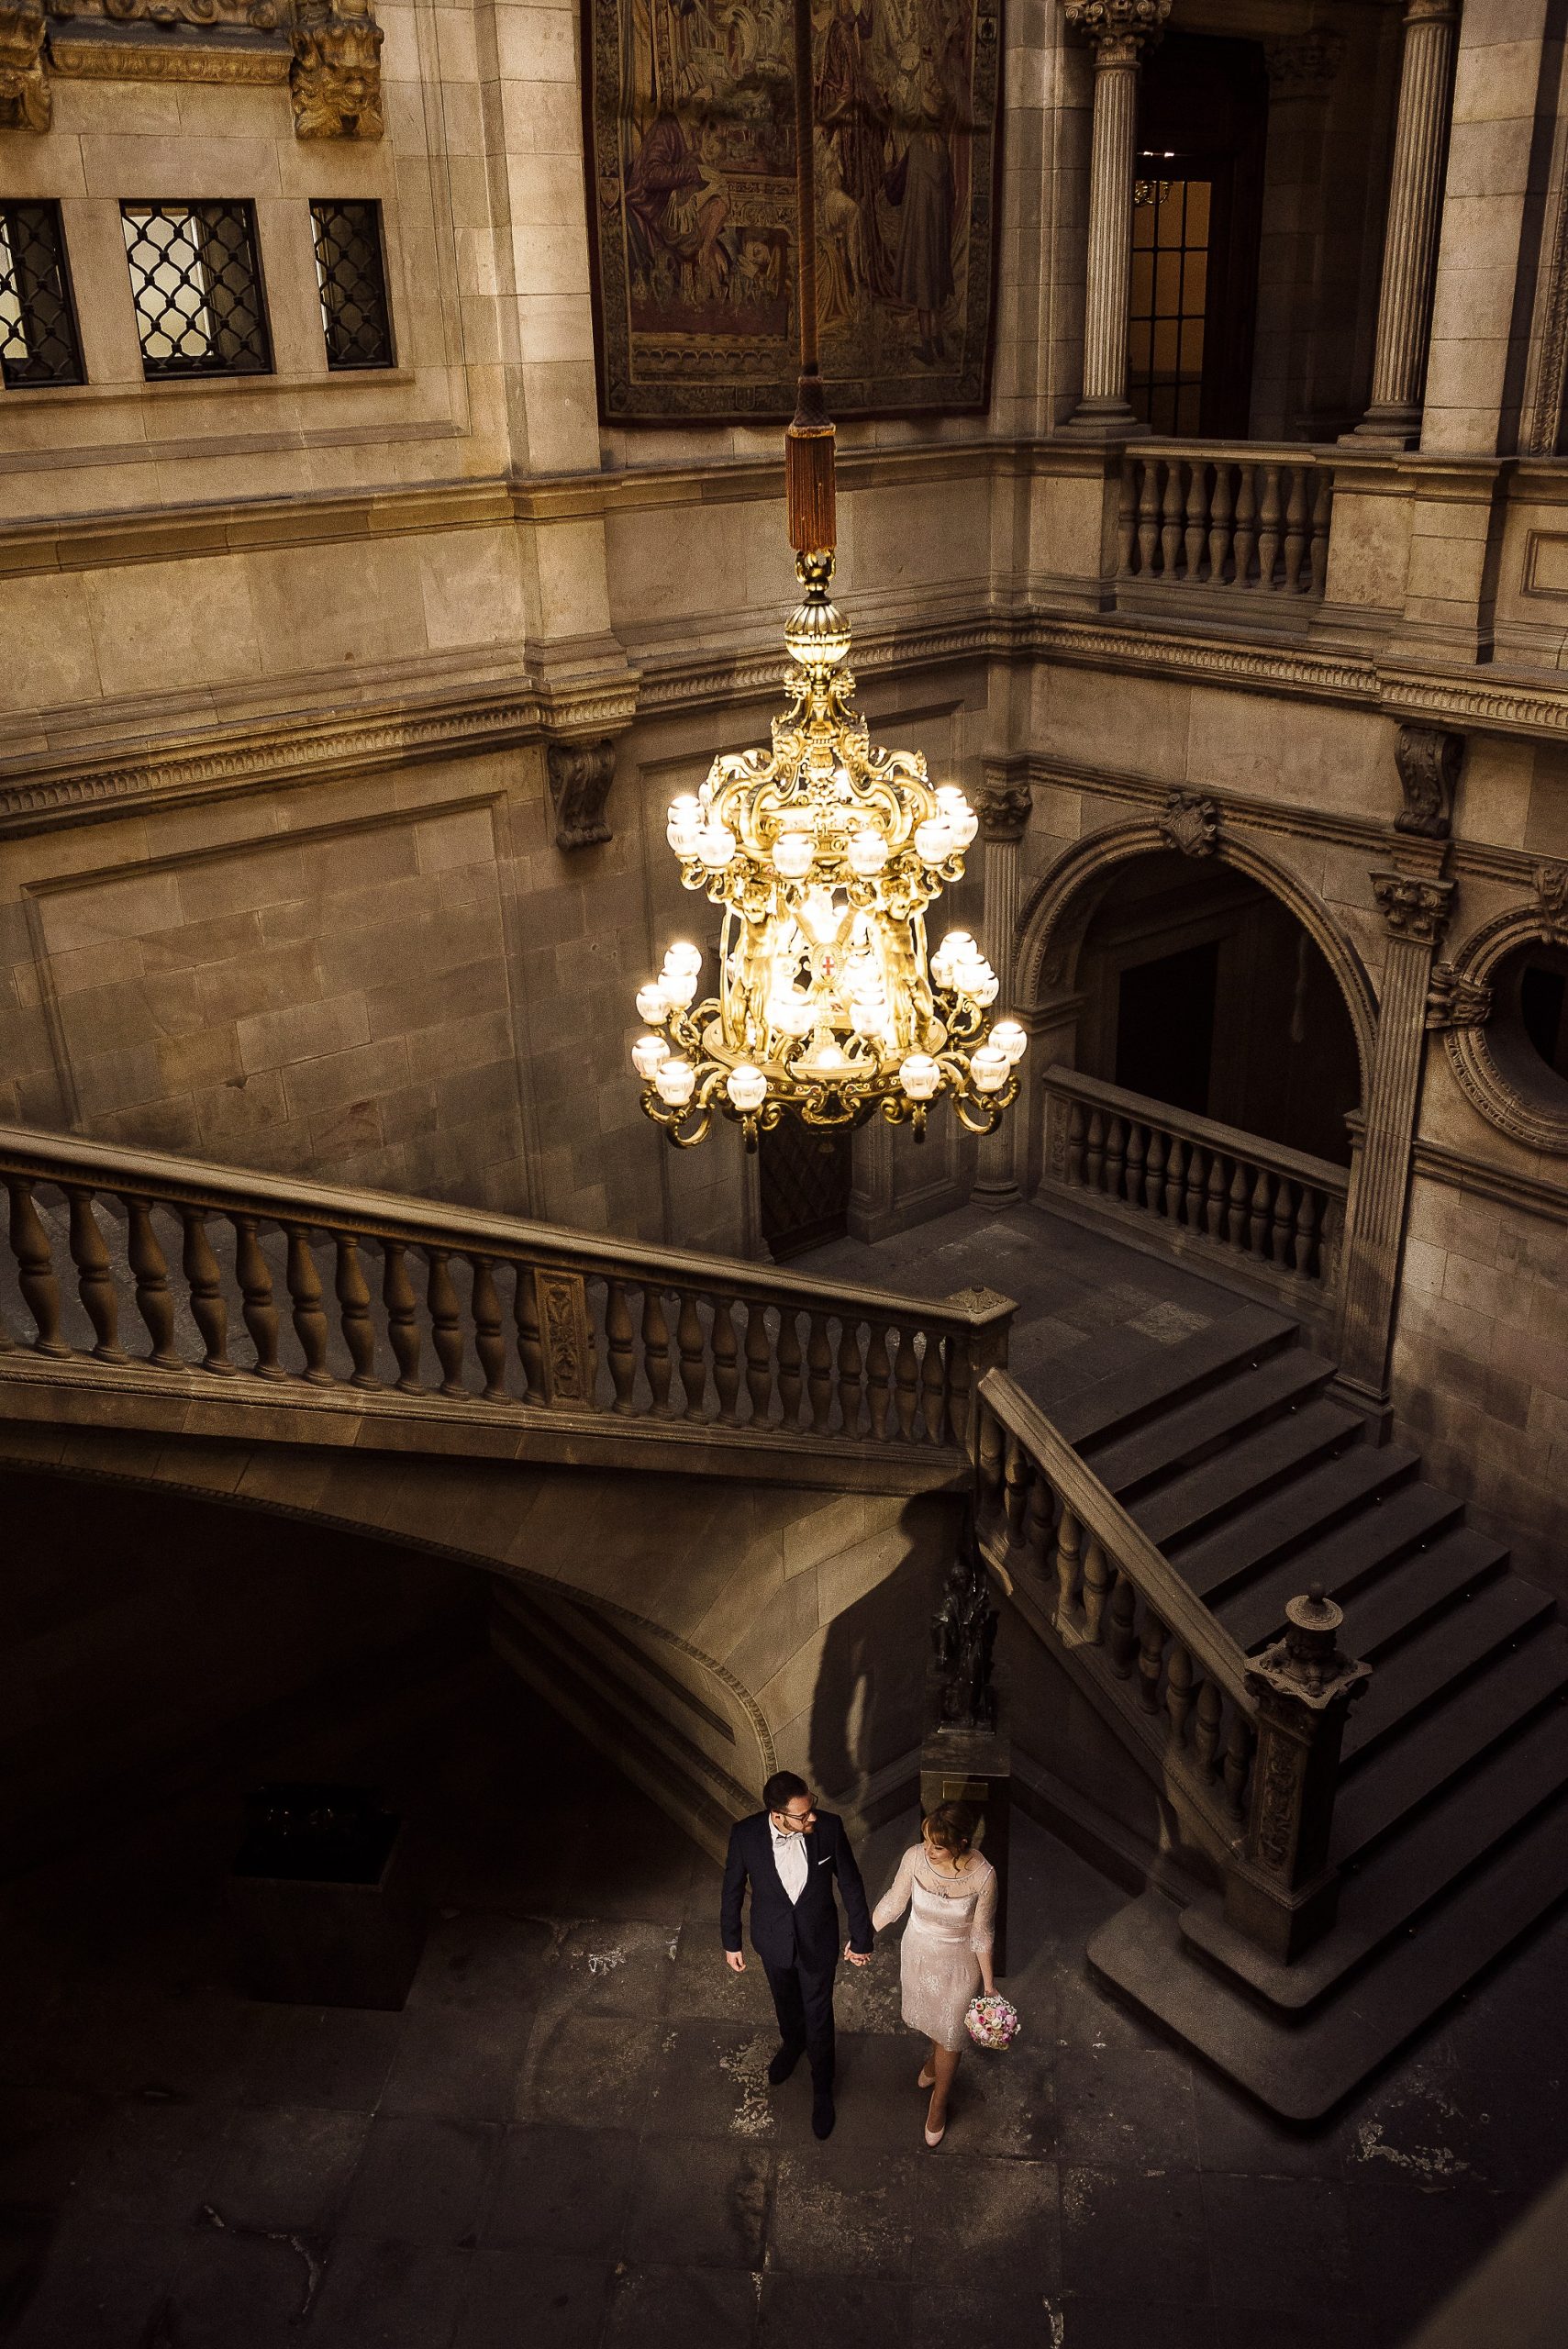 Equinox Mariage Mairie Barcelone 11680087922815 scaled